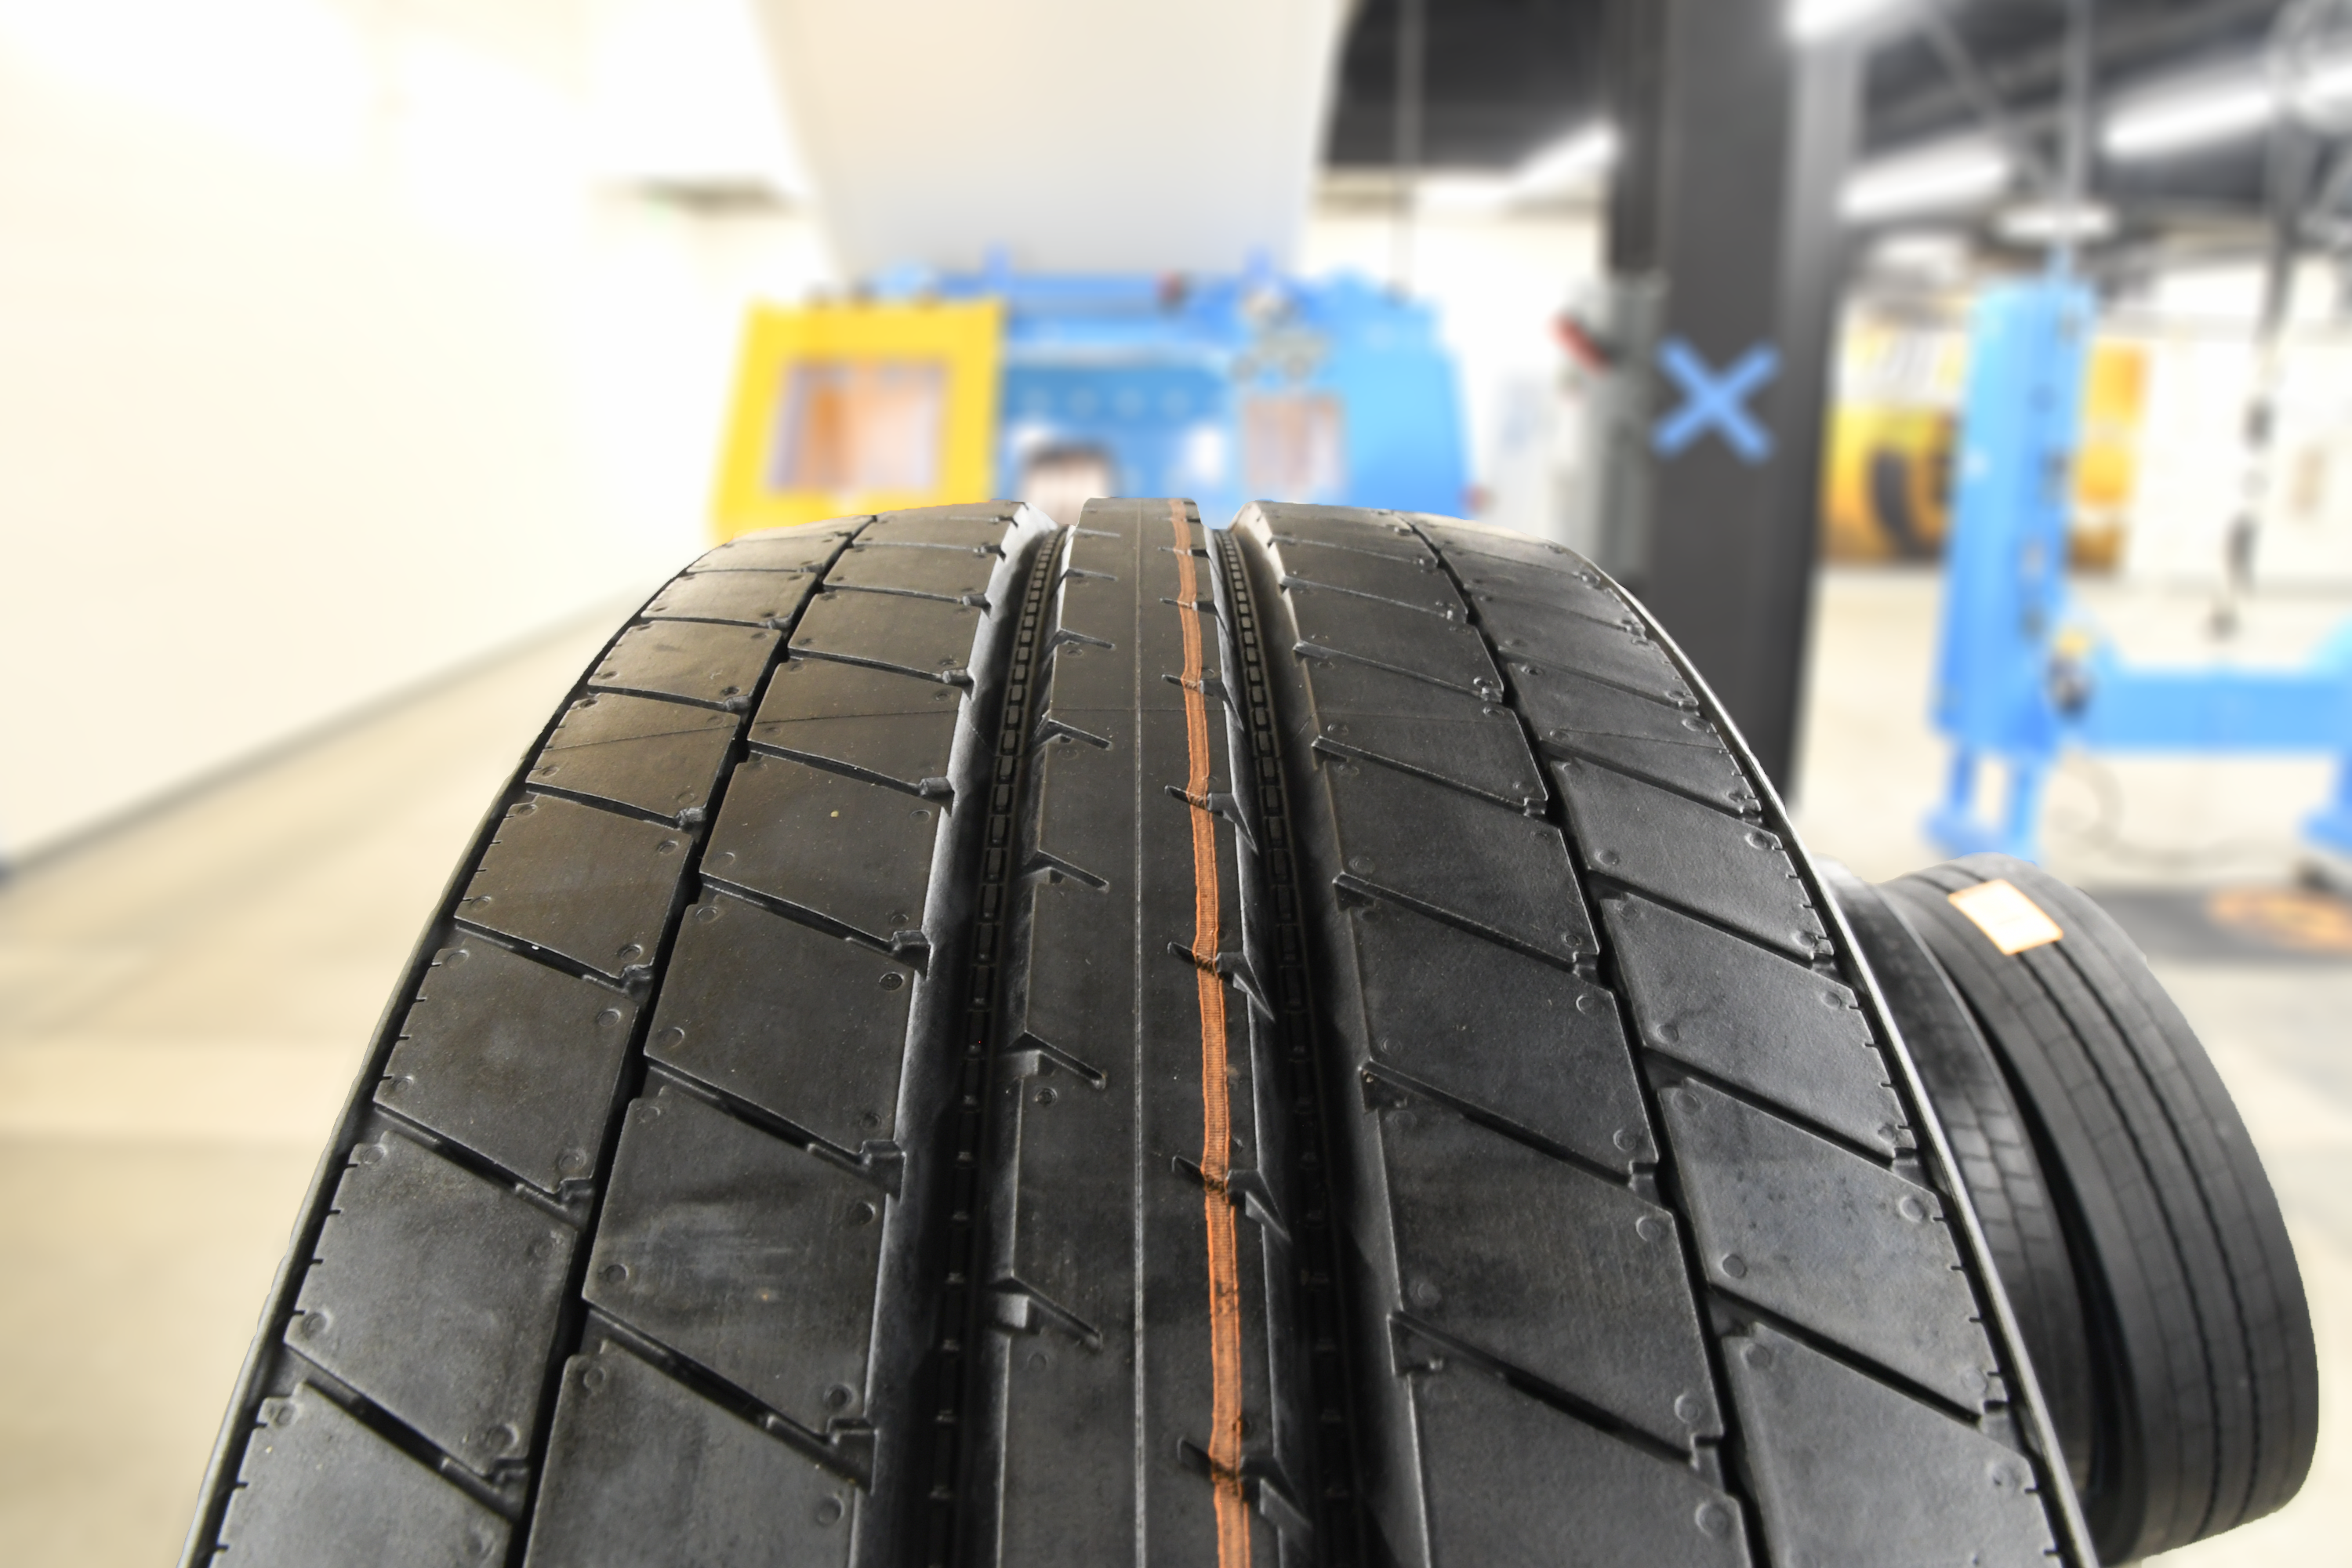 A close-up image of a retreaded tire awaiting final inspection involving high-pressurized testing for safety and reliability.